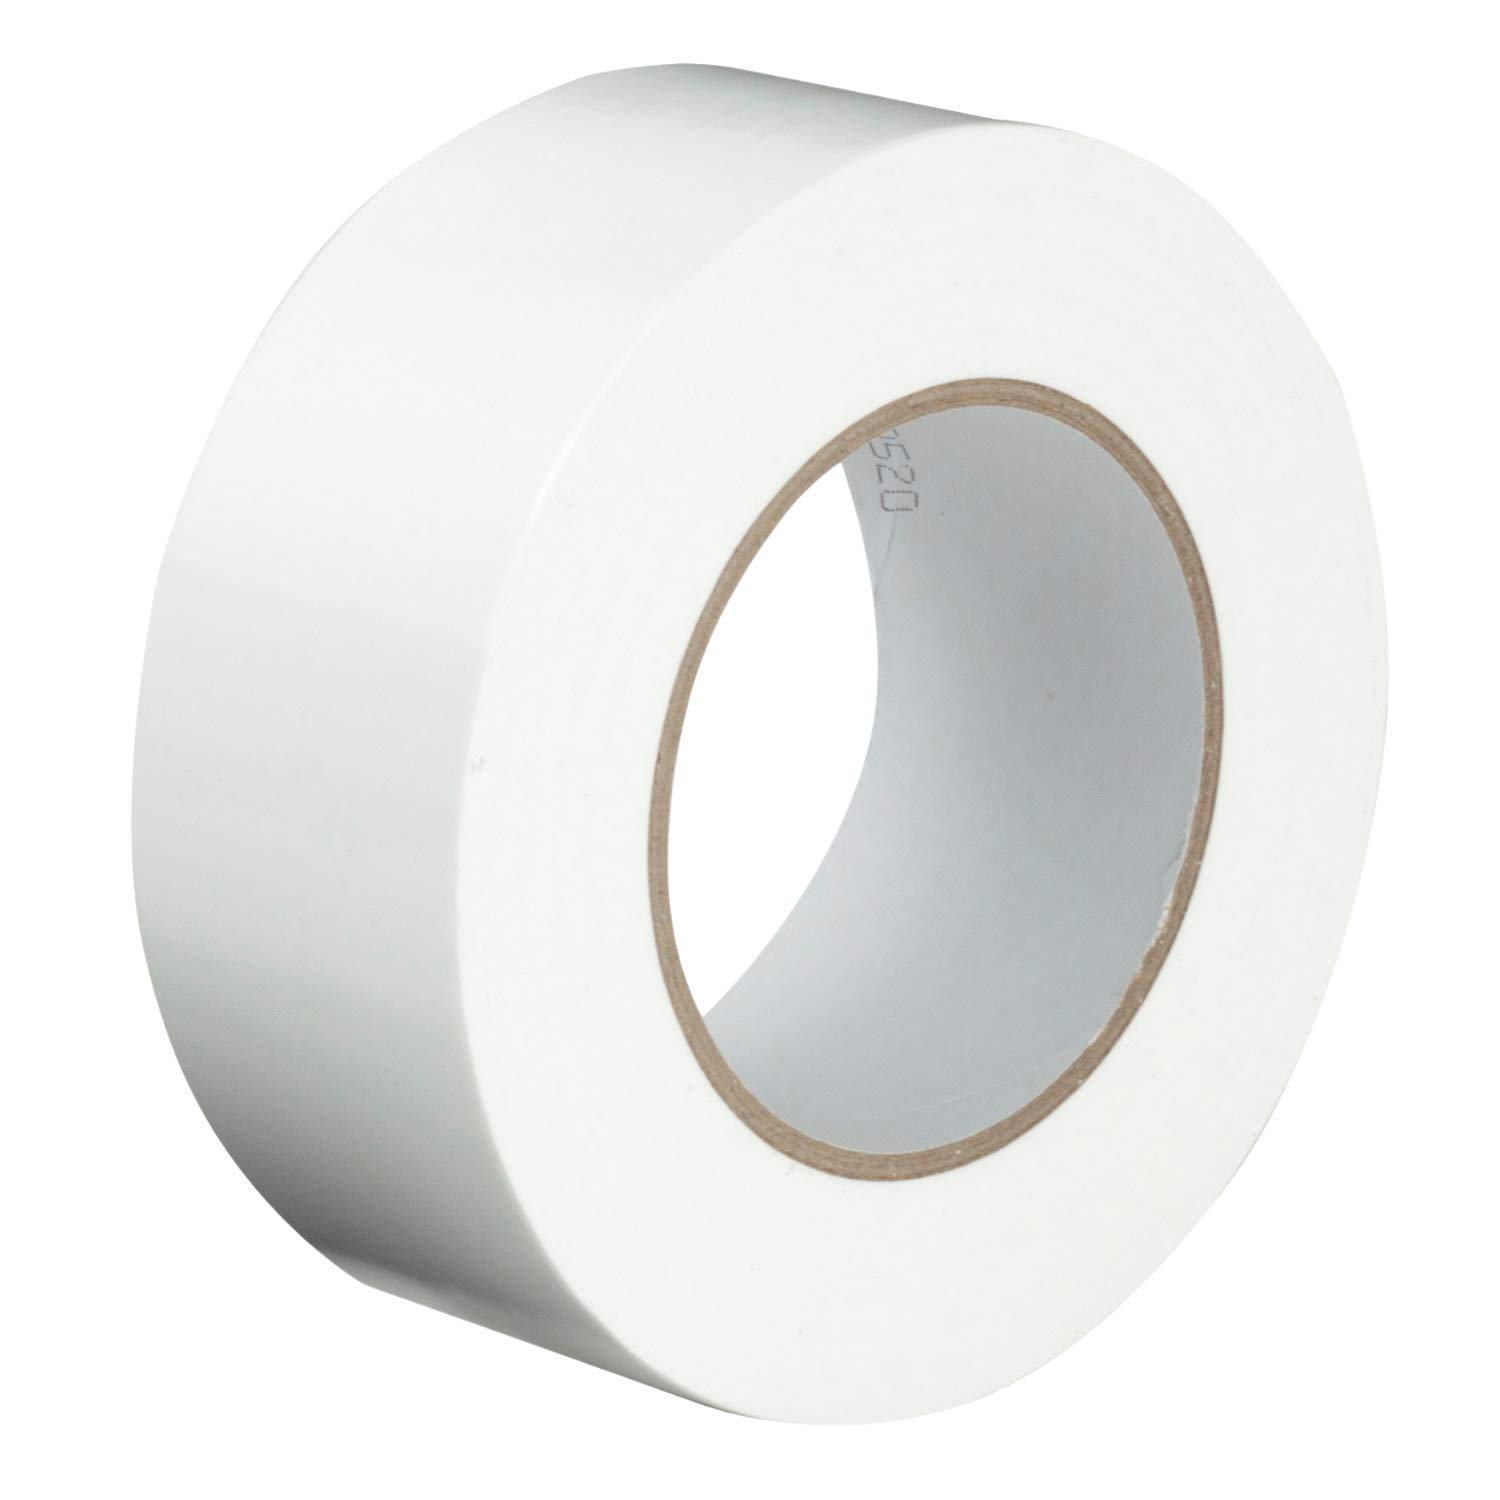 CLEARANCE/ PC-600 - 2 x 55M White Duct Tape, 24/case 